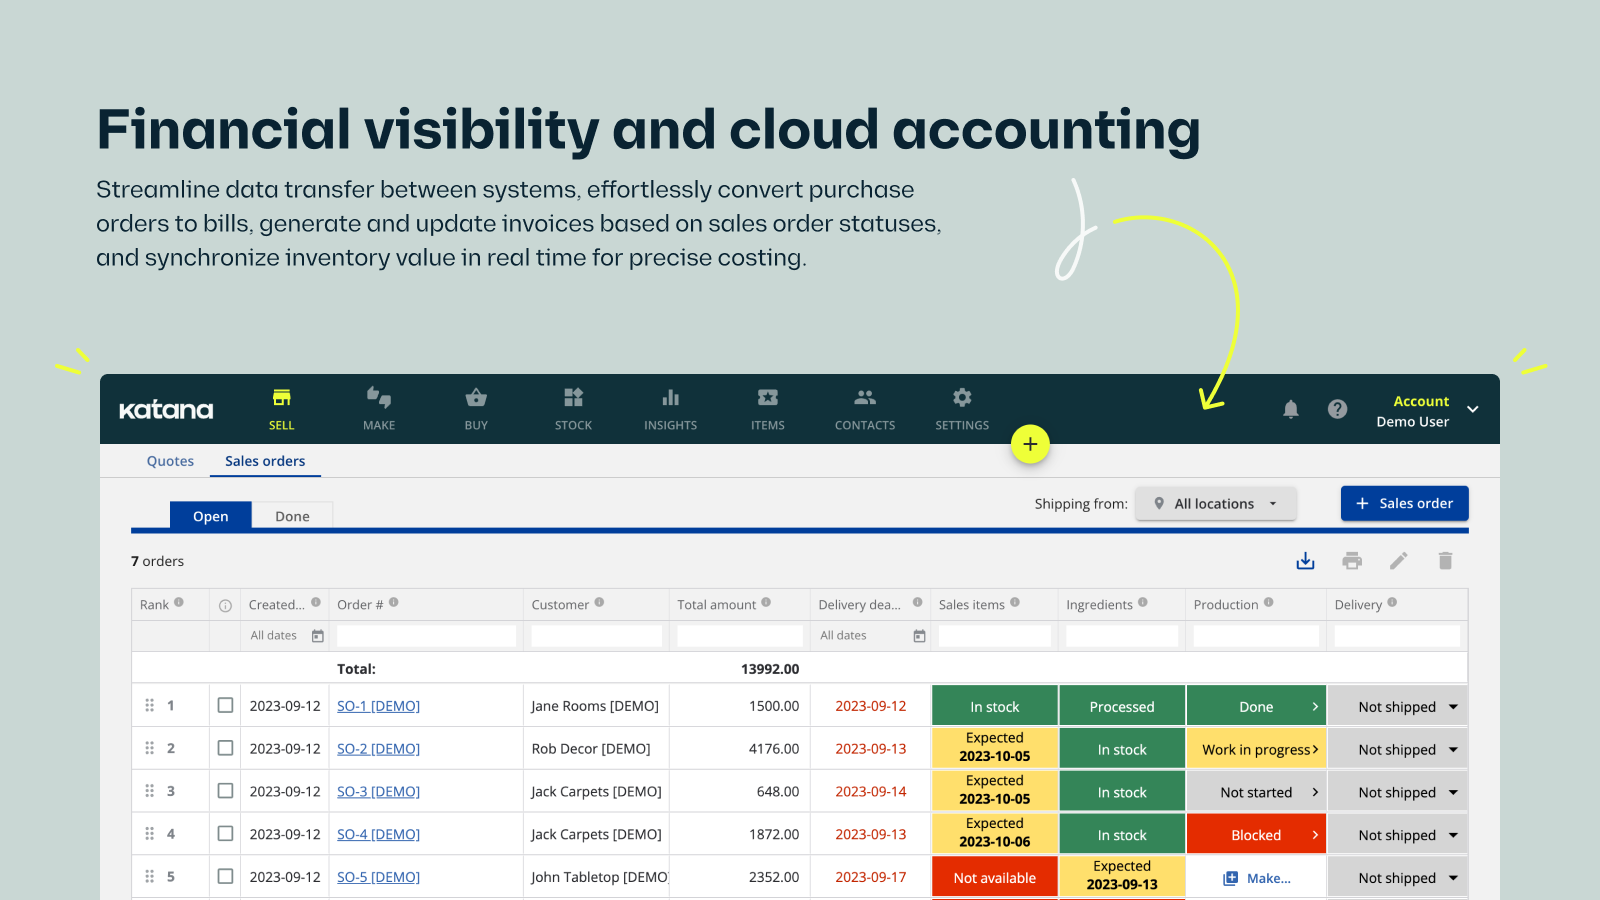 Financial visibility and cloud accounting with inventory sync